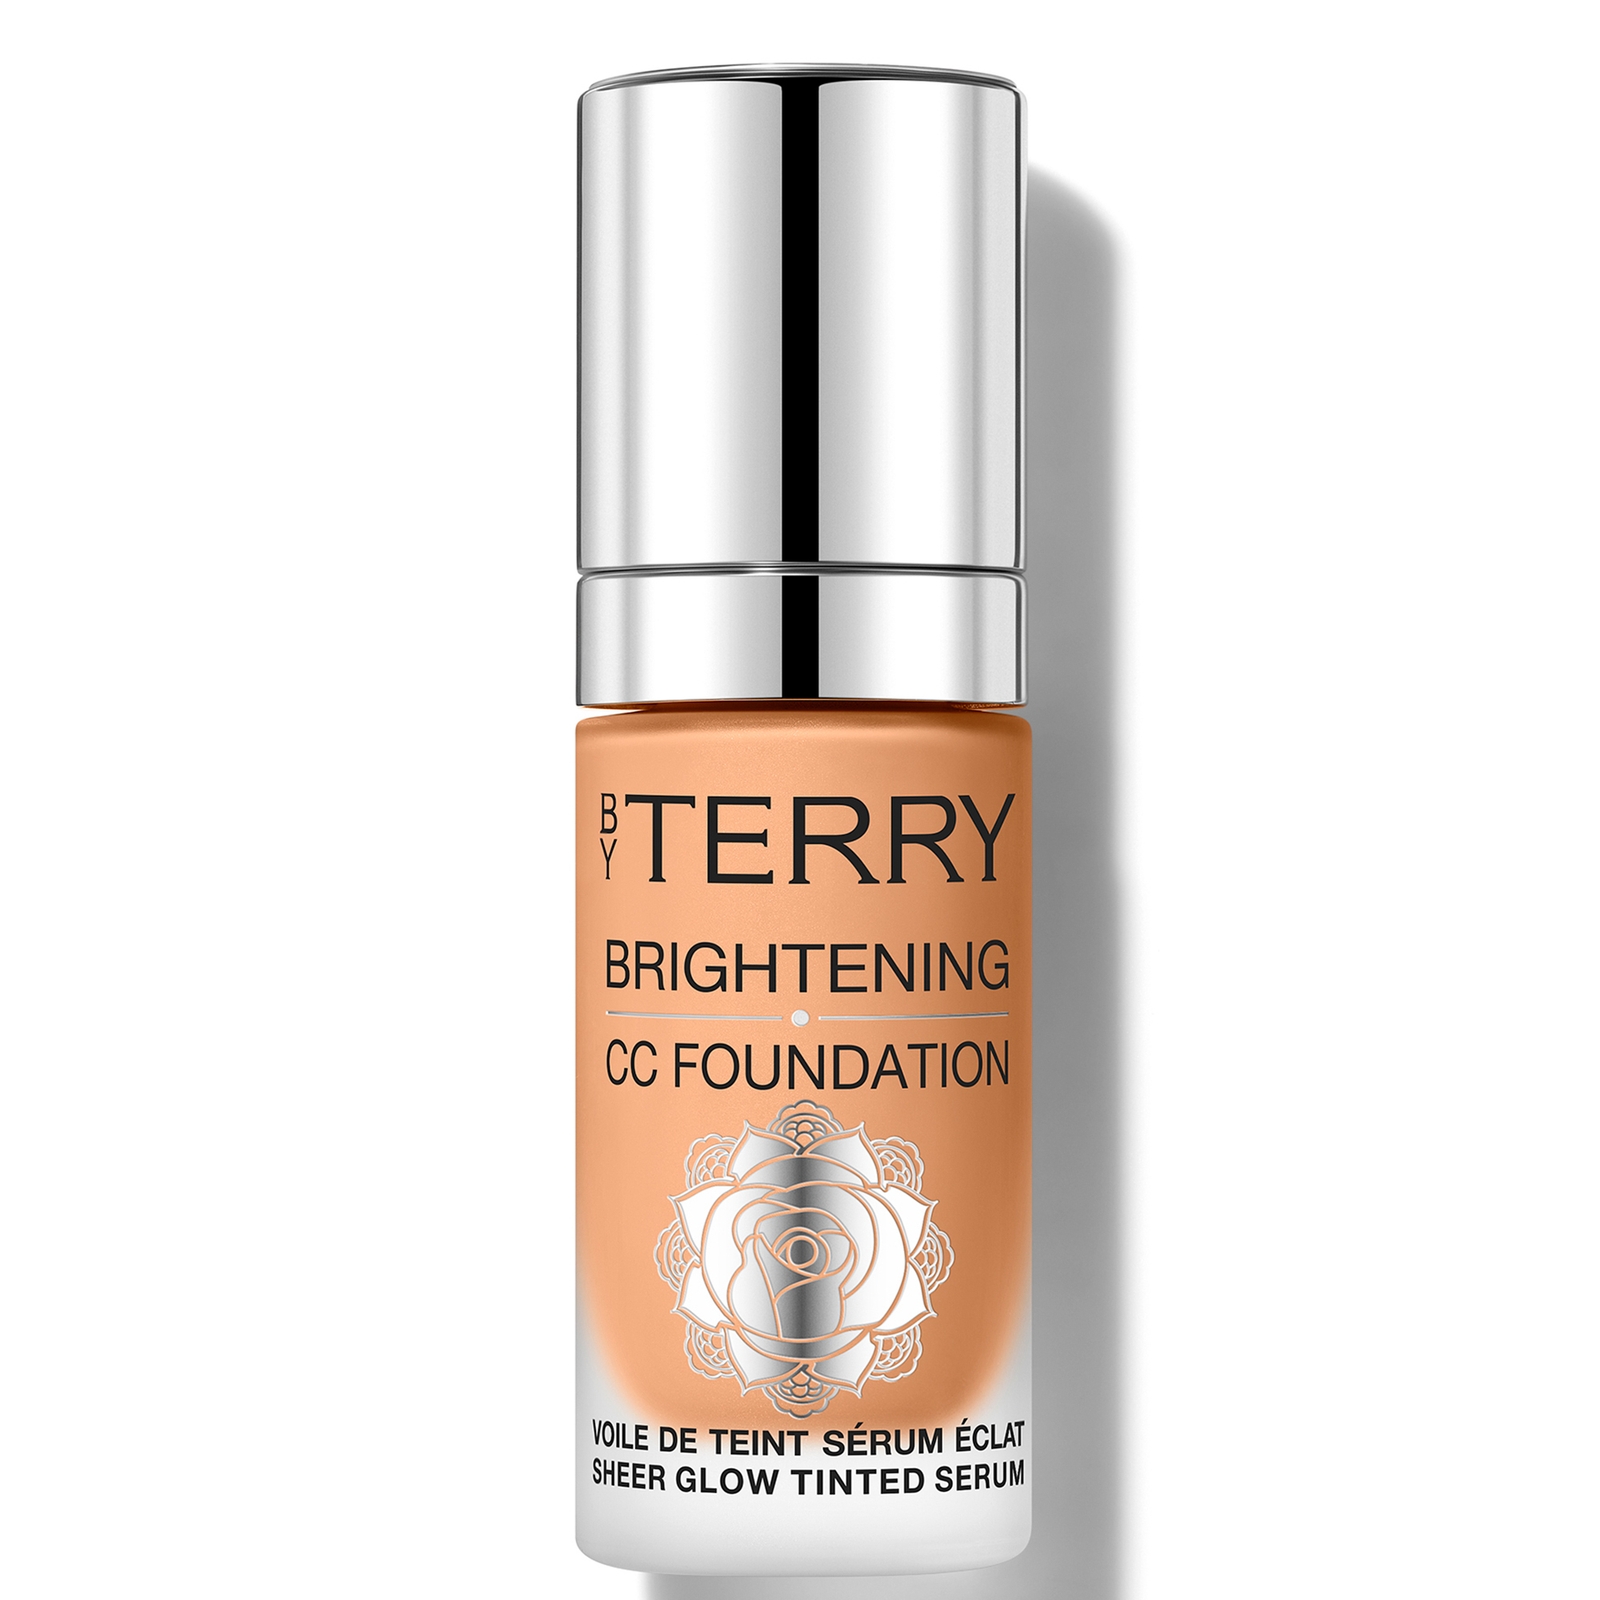 By Terry Brightening Cc Foundation 30ml (various Shades) - 6c - Tan Cool In Neutral